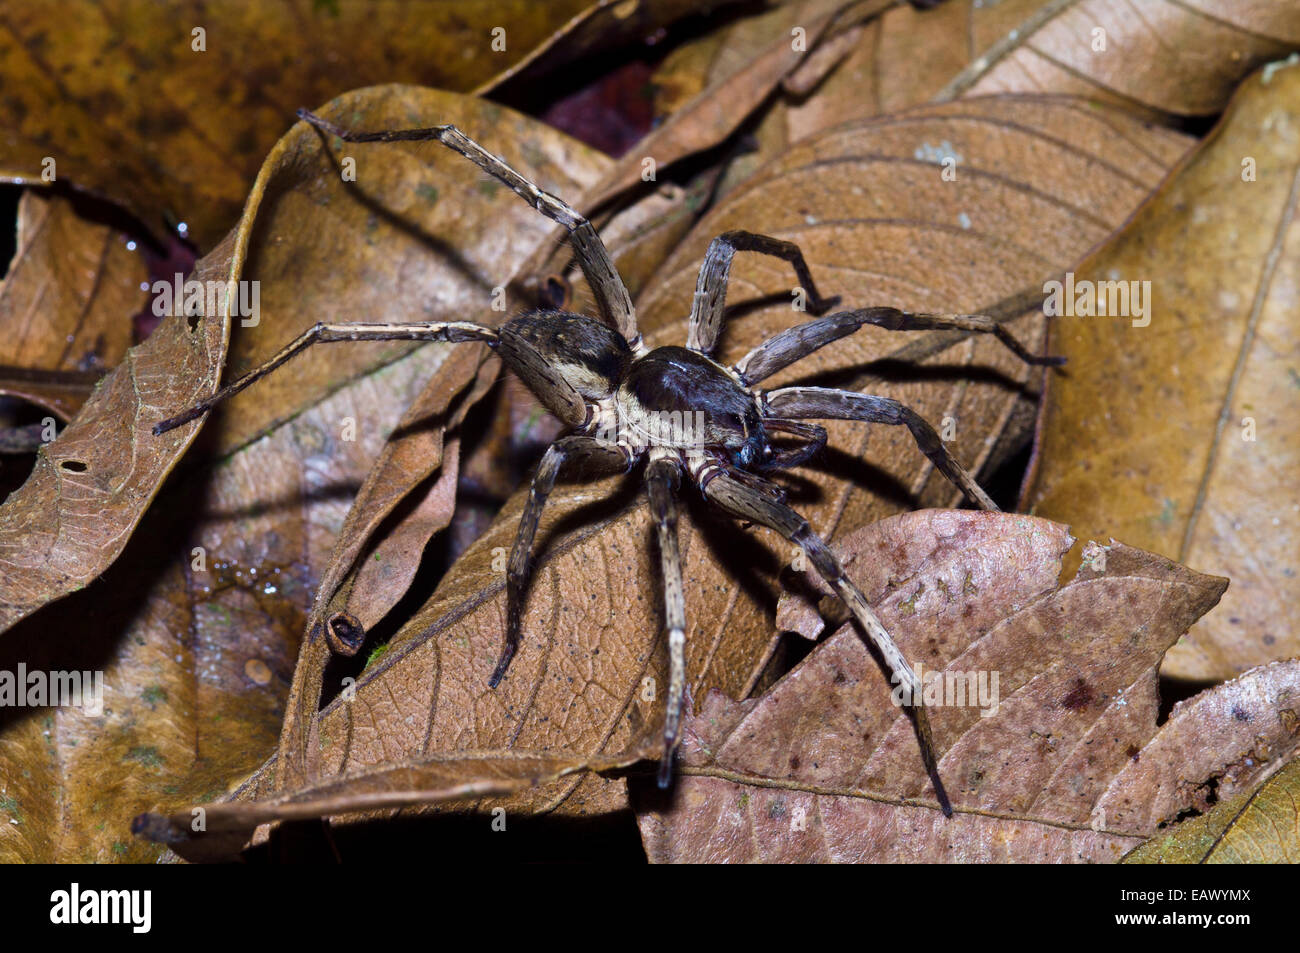 A Wolf Spider is an agile and fierce hunter searching for prey in the leaf litter. Stock Photo